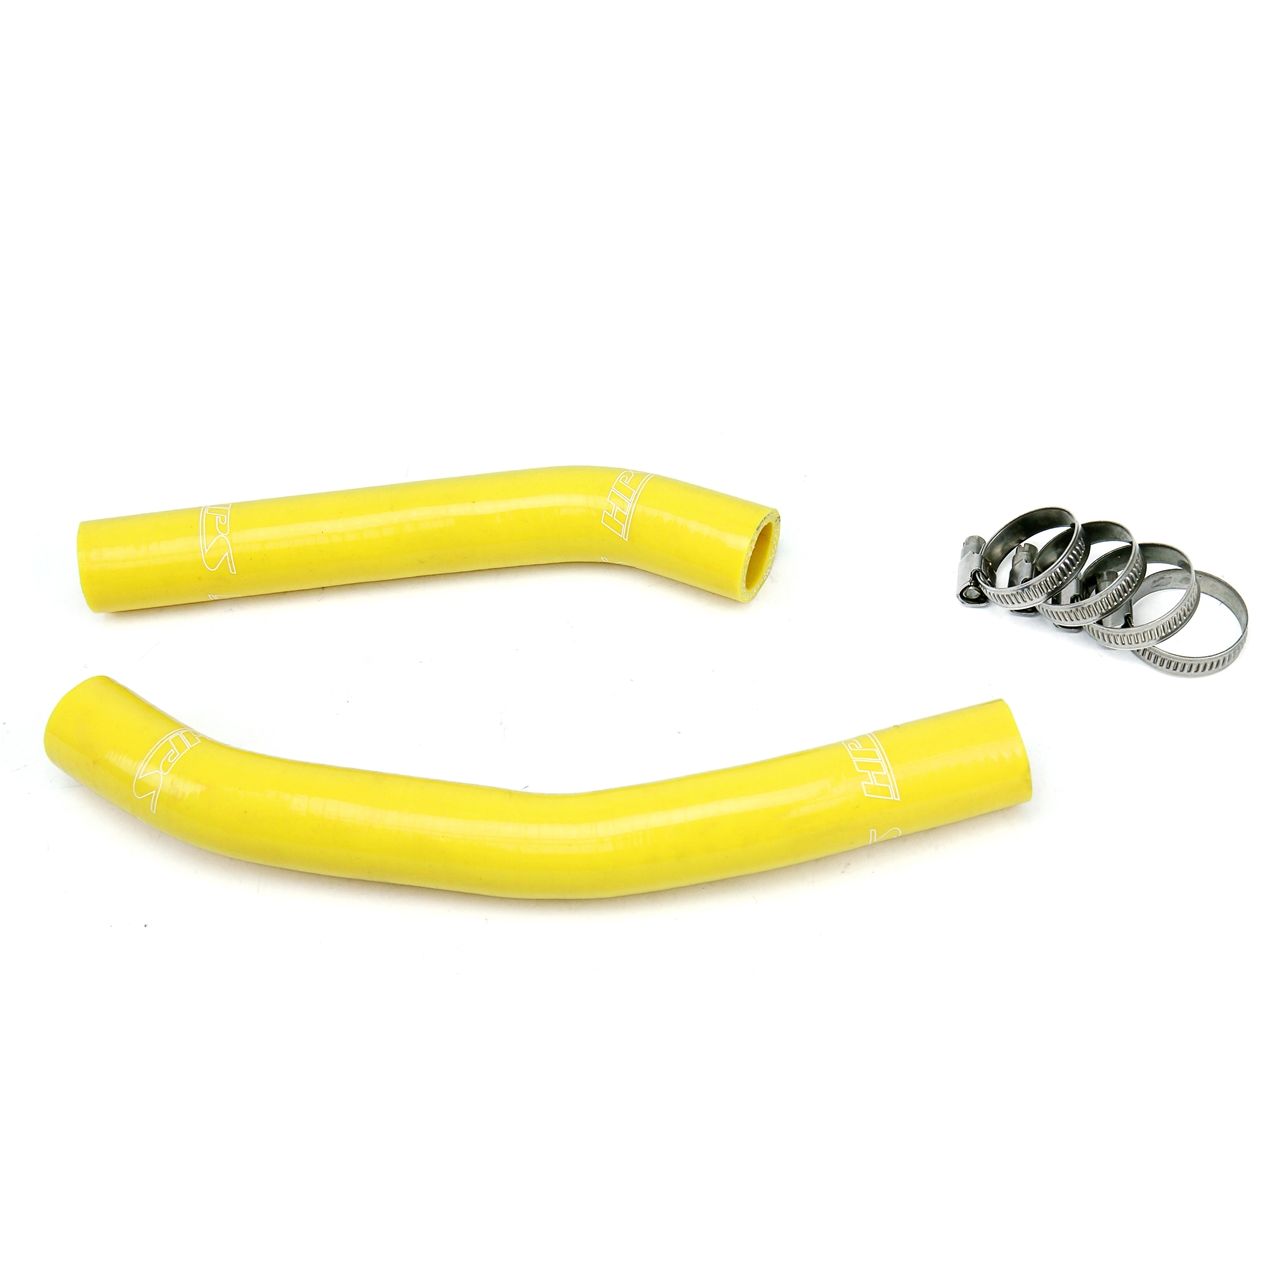 HPS Yellow Reinforced Silicone Radiator Hose Kit for Suzuki 06-10 LTR450